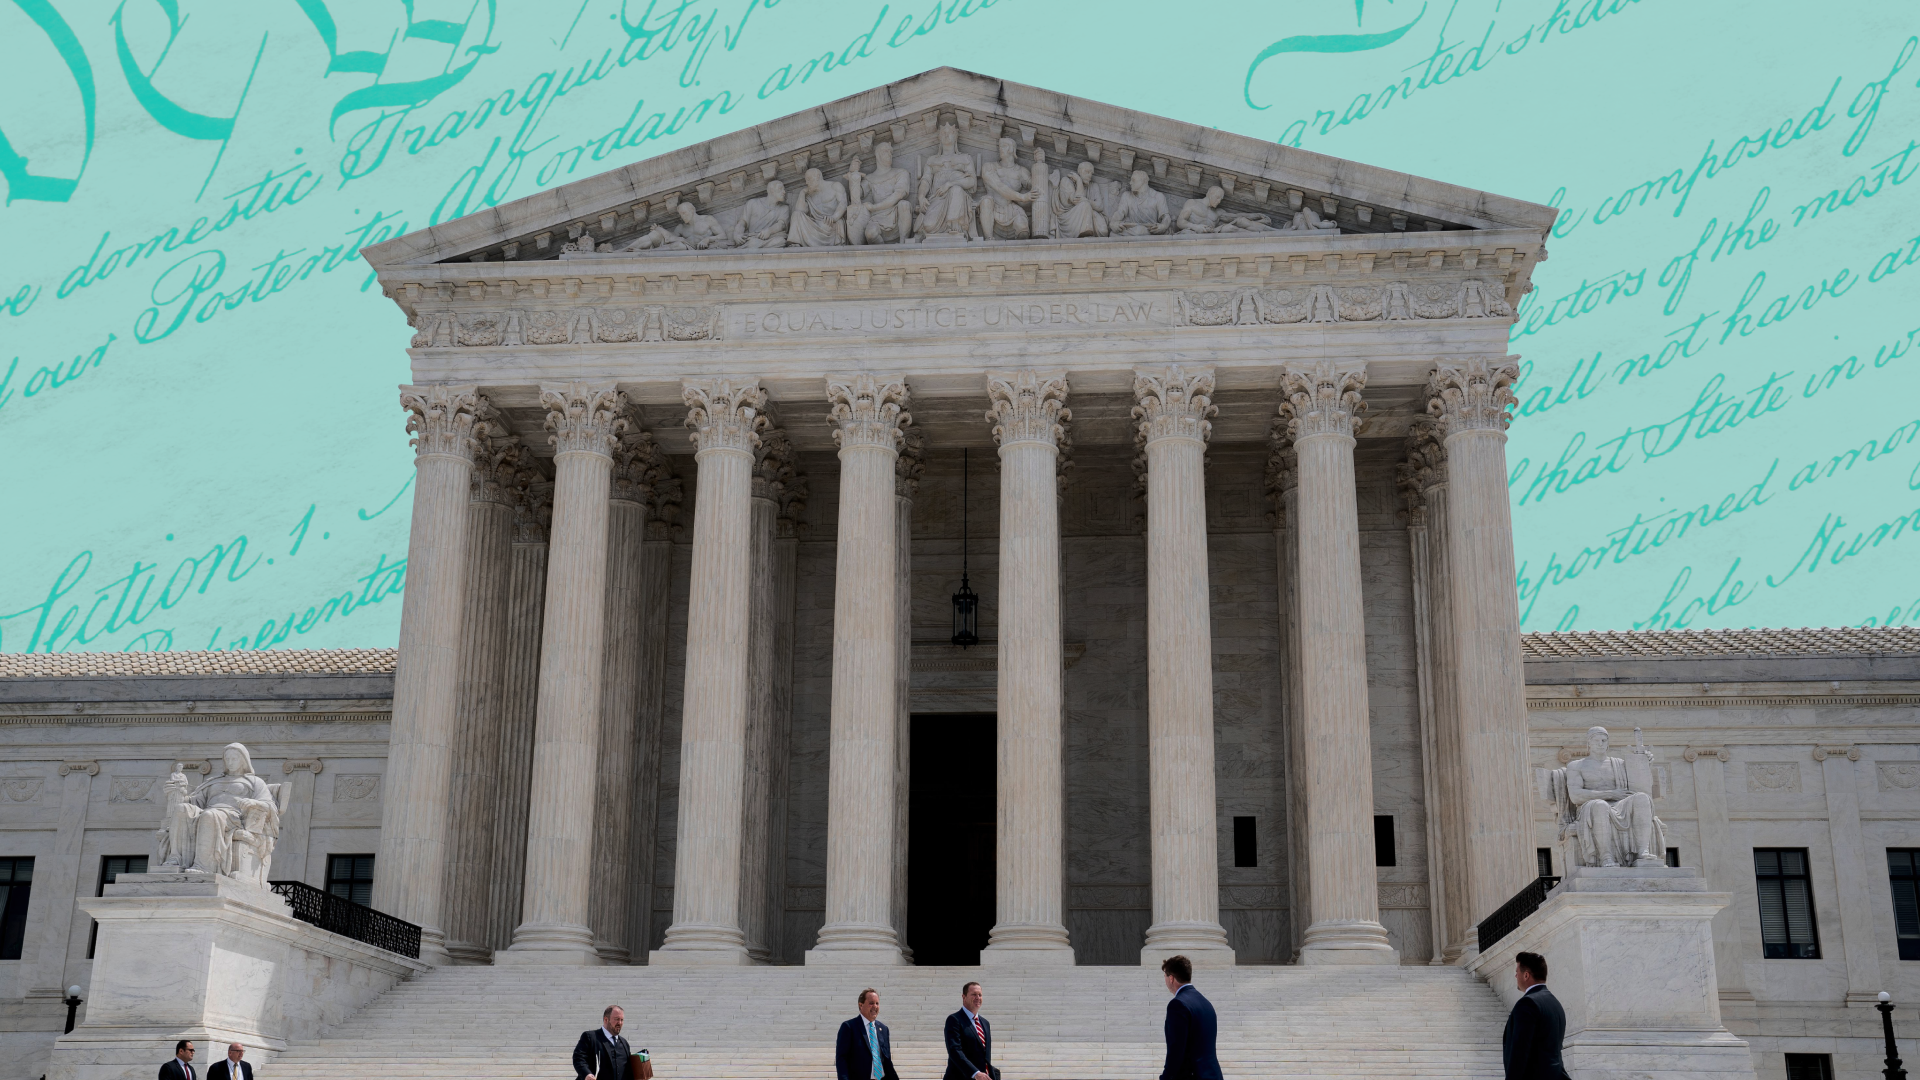 The Supreme Court building, with people in suits walking in front of it, against a background illustration of the text of the US Constitution